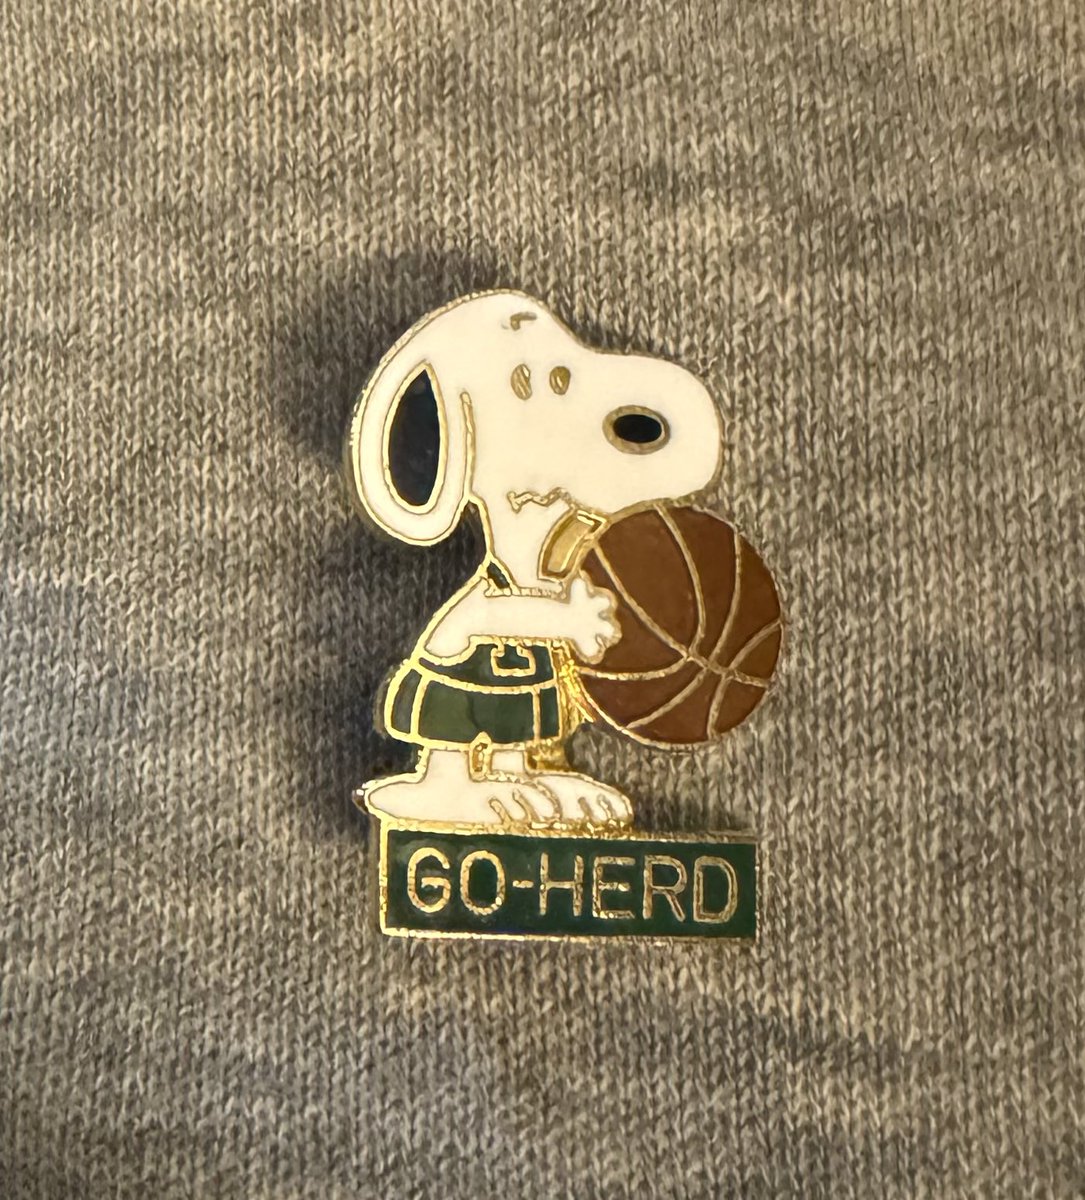 How great is this? Legendary Kentucky high school coach @coachrwoods passed along this Snoopy “Go Herd” lapel pin to me that was gifted to him many years ago by legendary @Herd_MBB head coach Stu Aberdeen!

LOVE IT!!!
#GoHerd